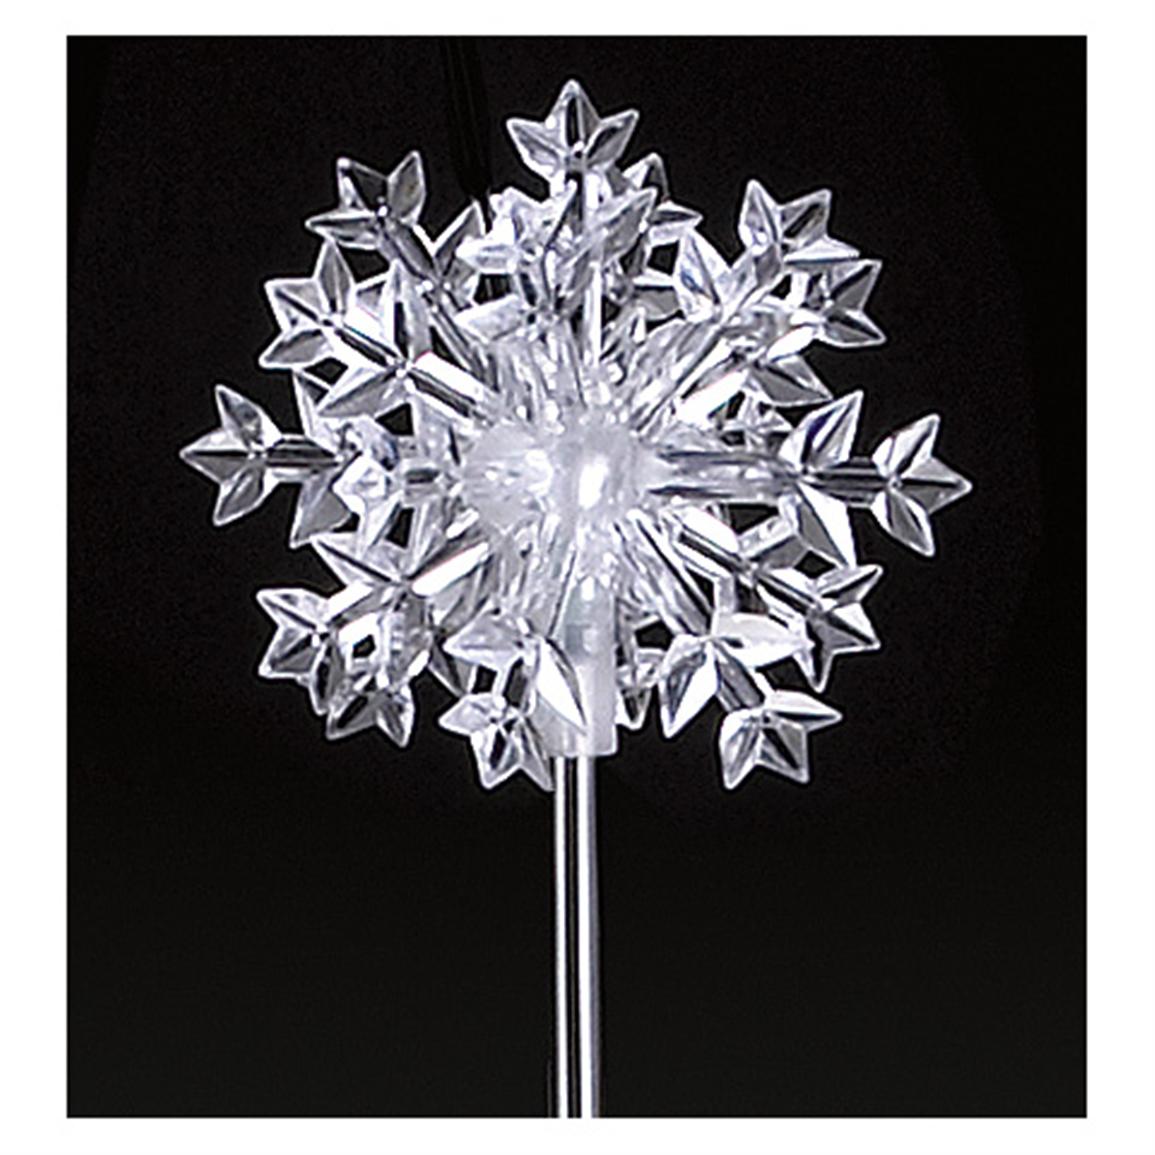 5 Snowflake Outdoor Lights - 228959, Solar & Outdoor Lighting at Sportsman's Guide